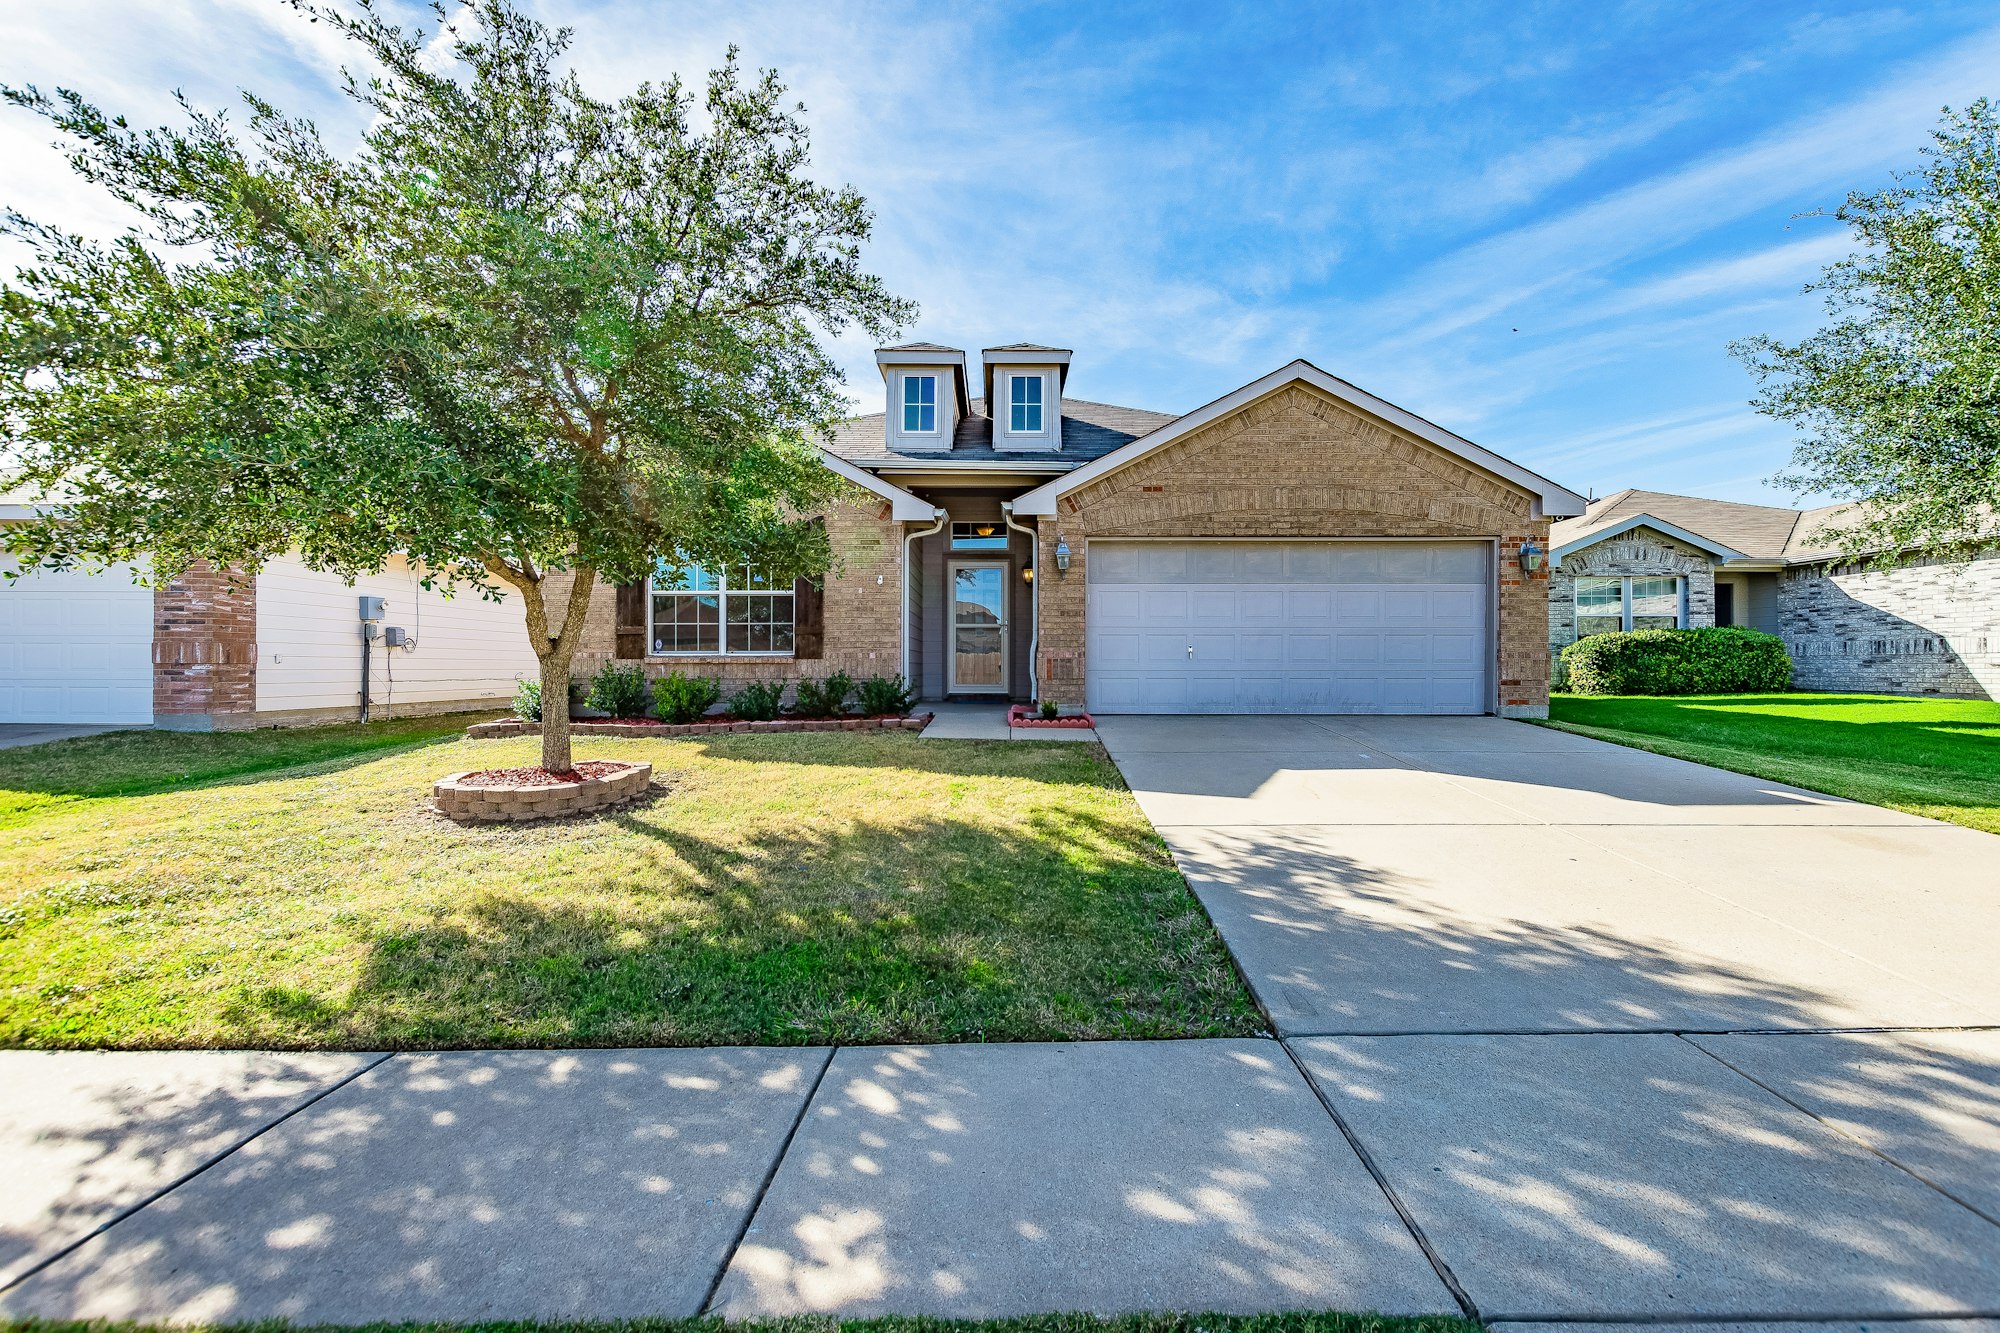 Photo 1 of 20 - 814 Sycamore St, Anna, TX 75409